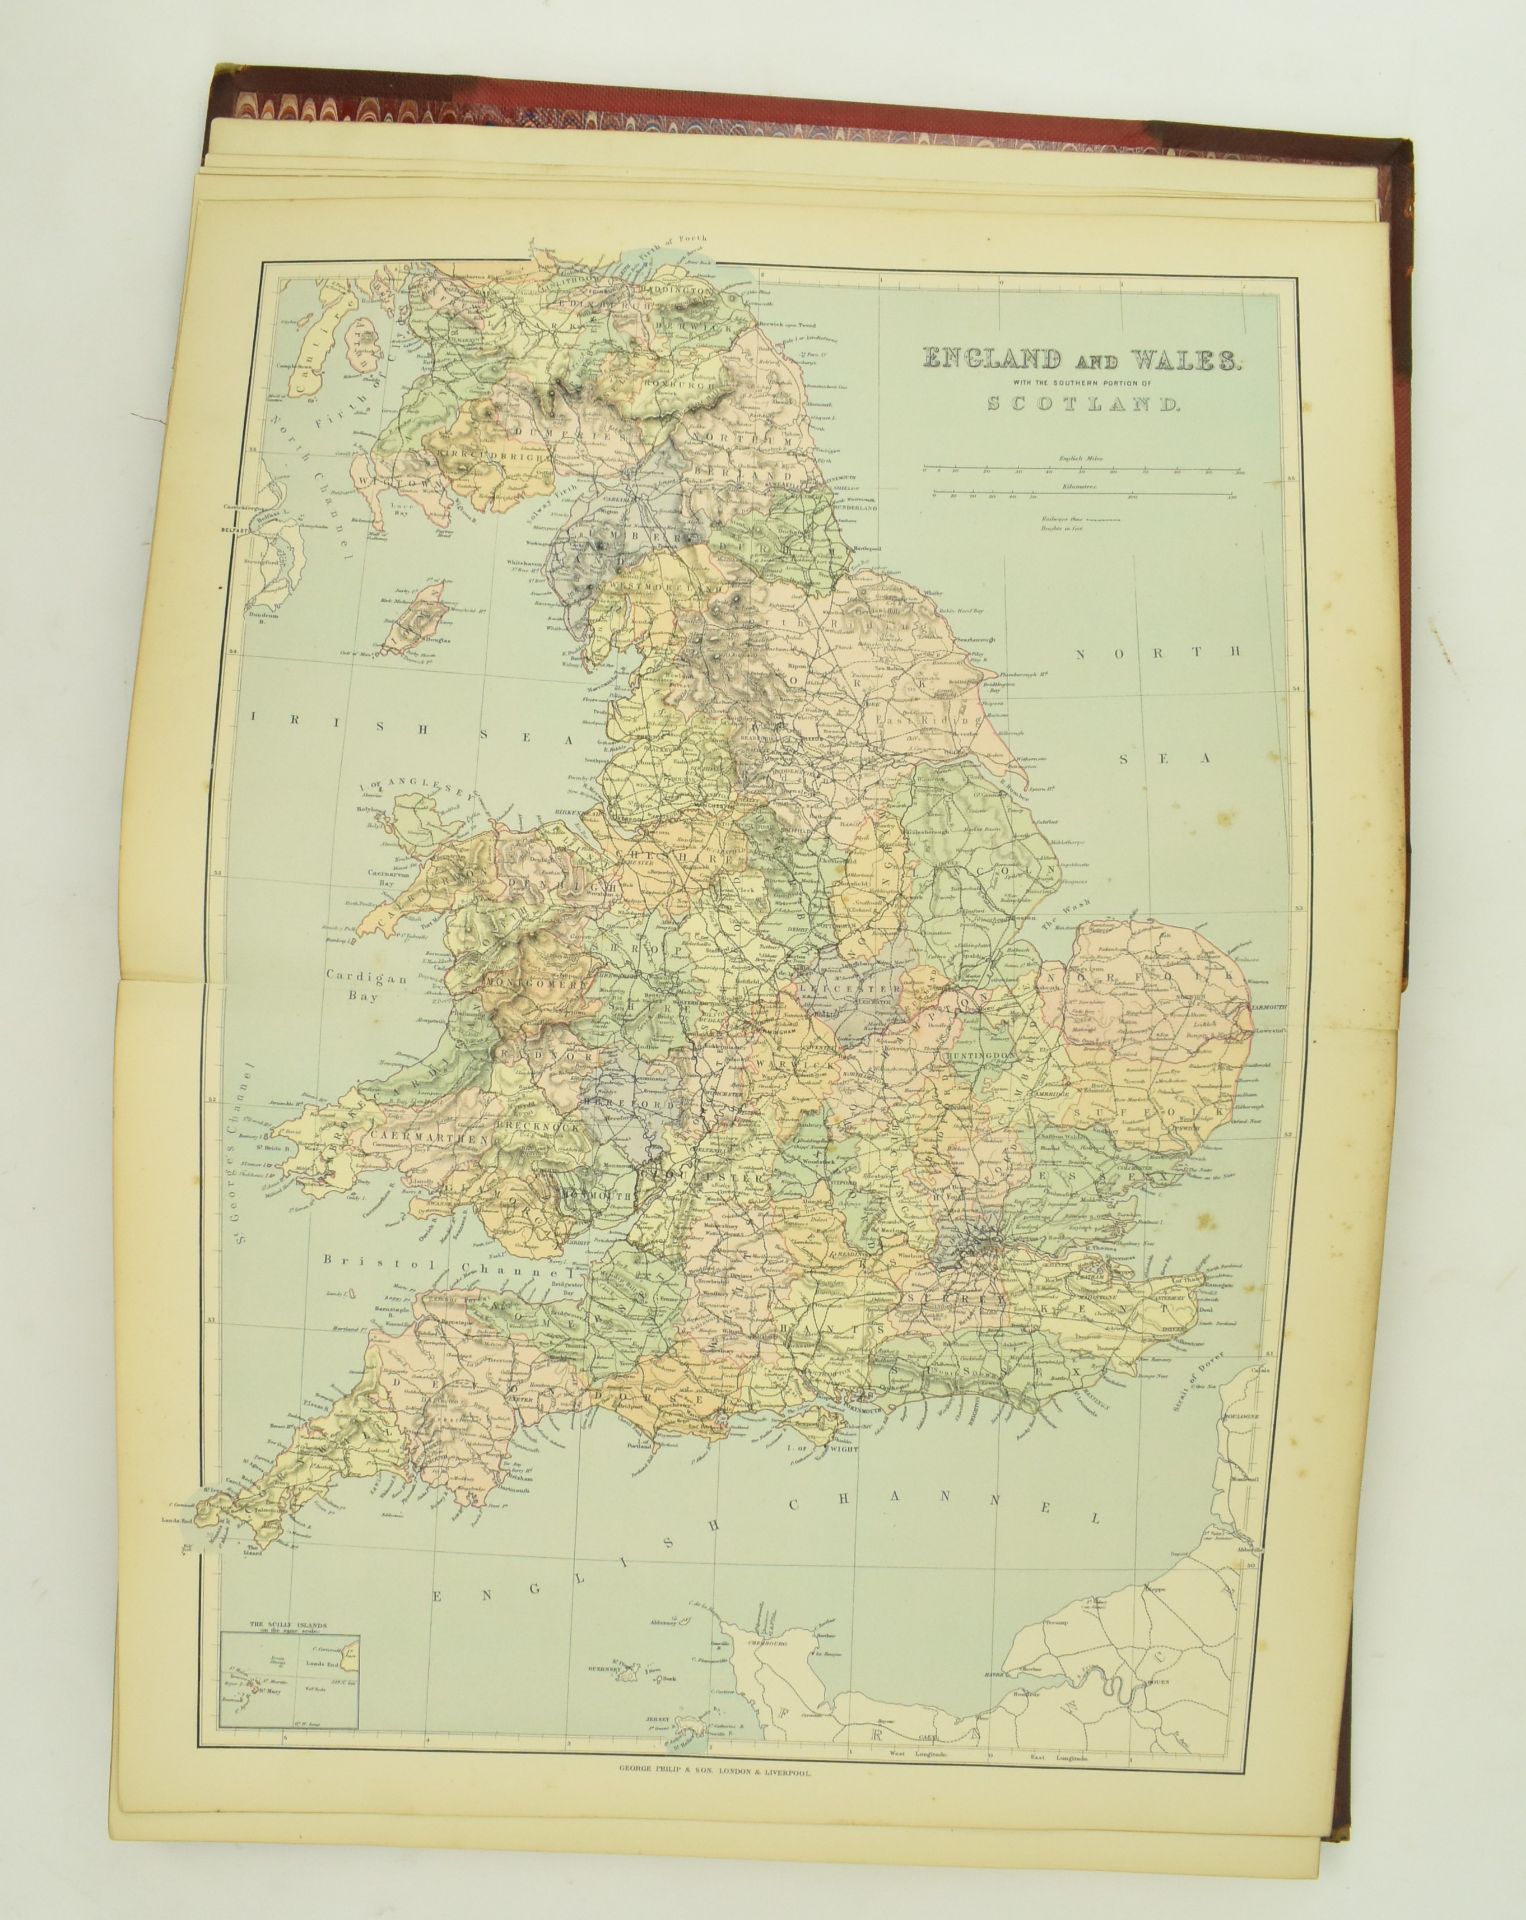 1885 PHILIPS ATLAS OF COUNTIES OF ENGLAND ILLUS WITH MAPS - Image 3 of 6